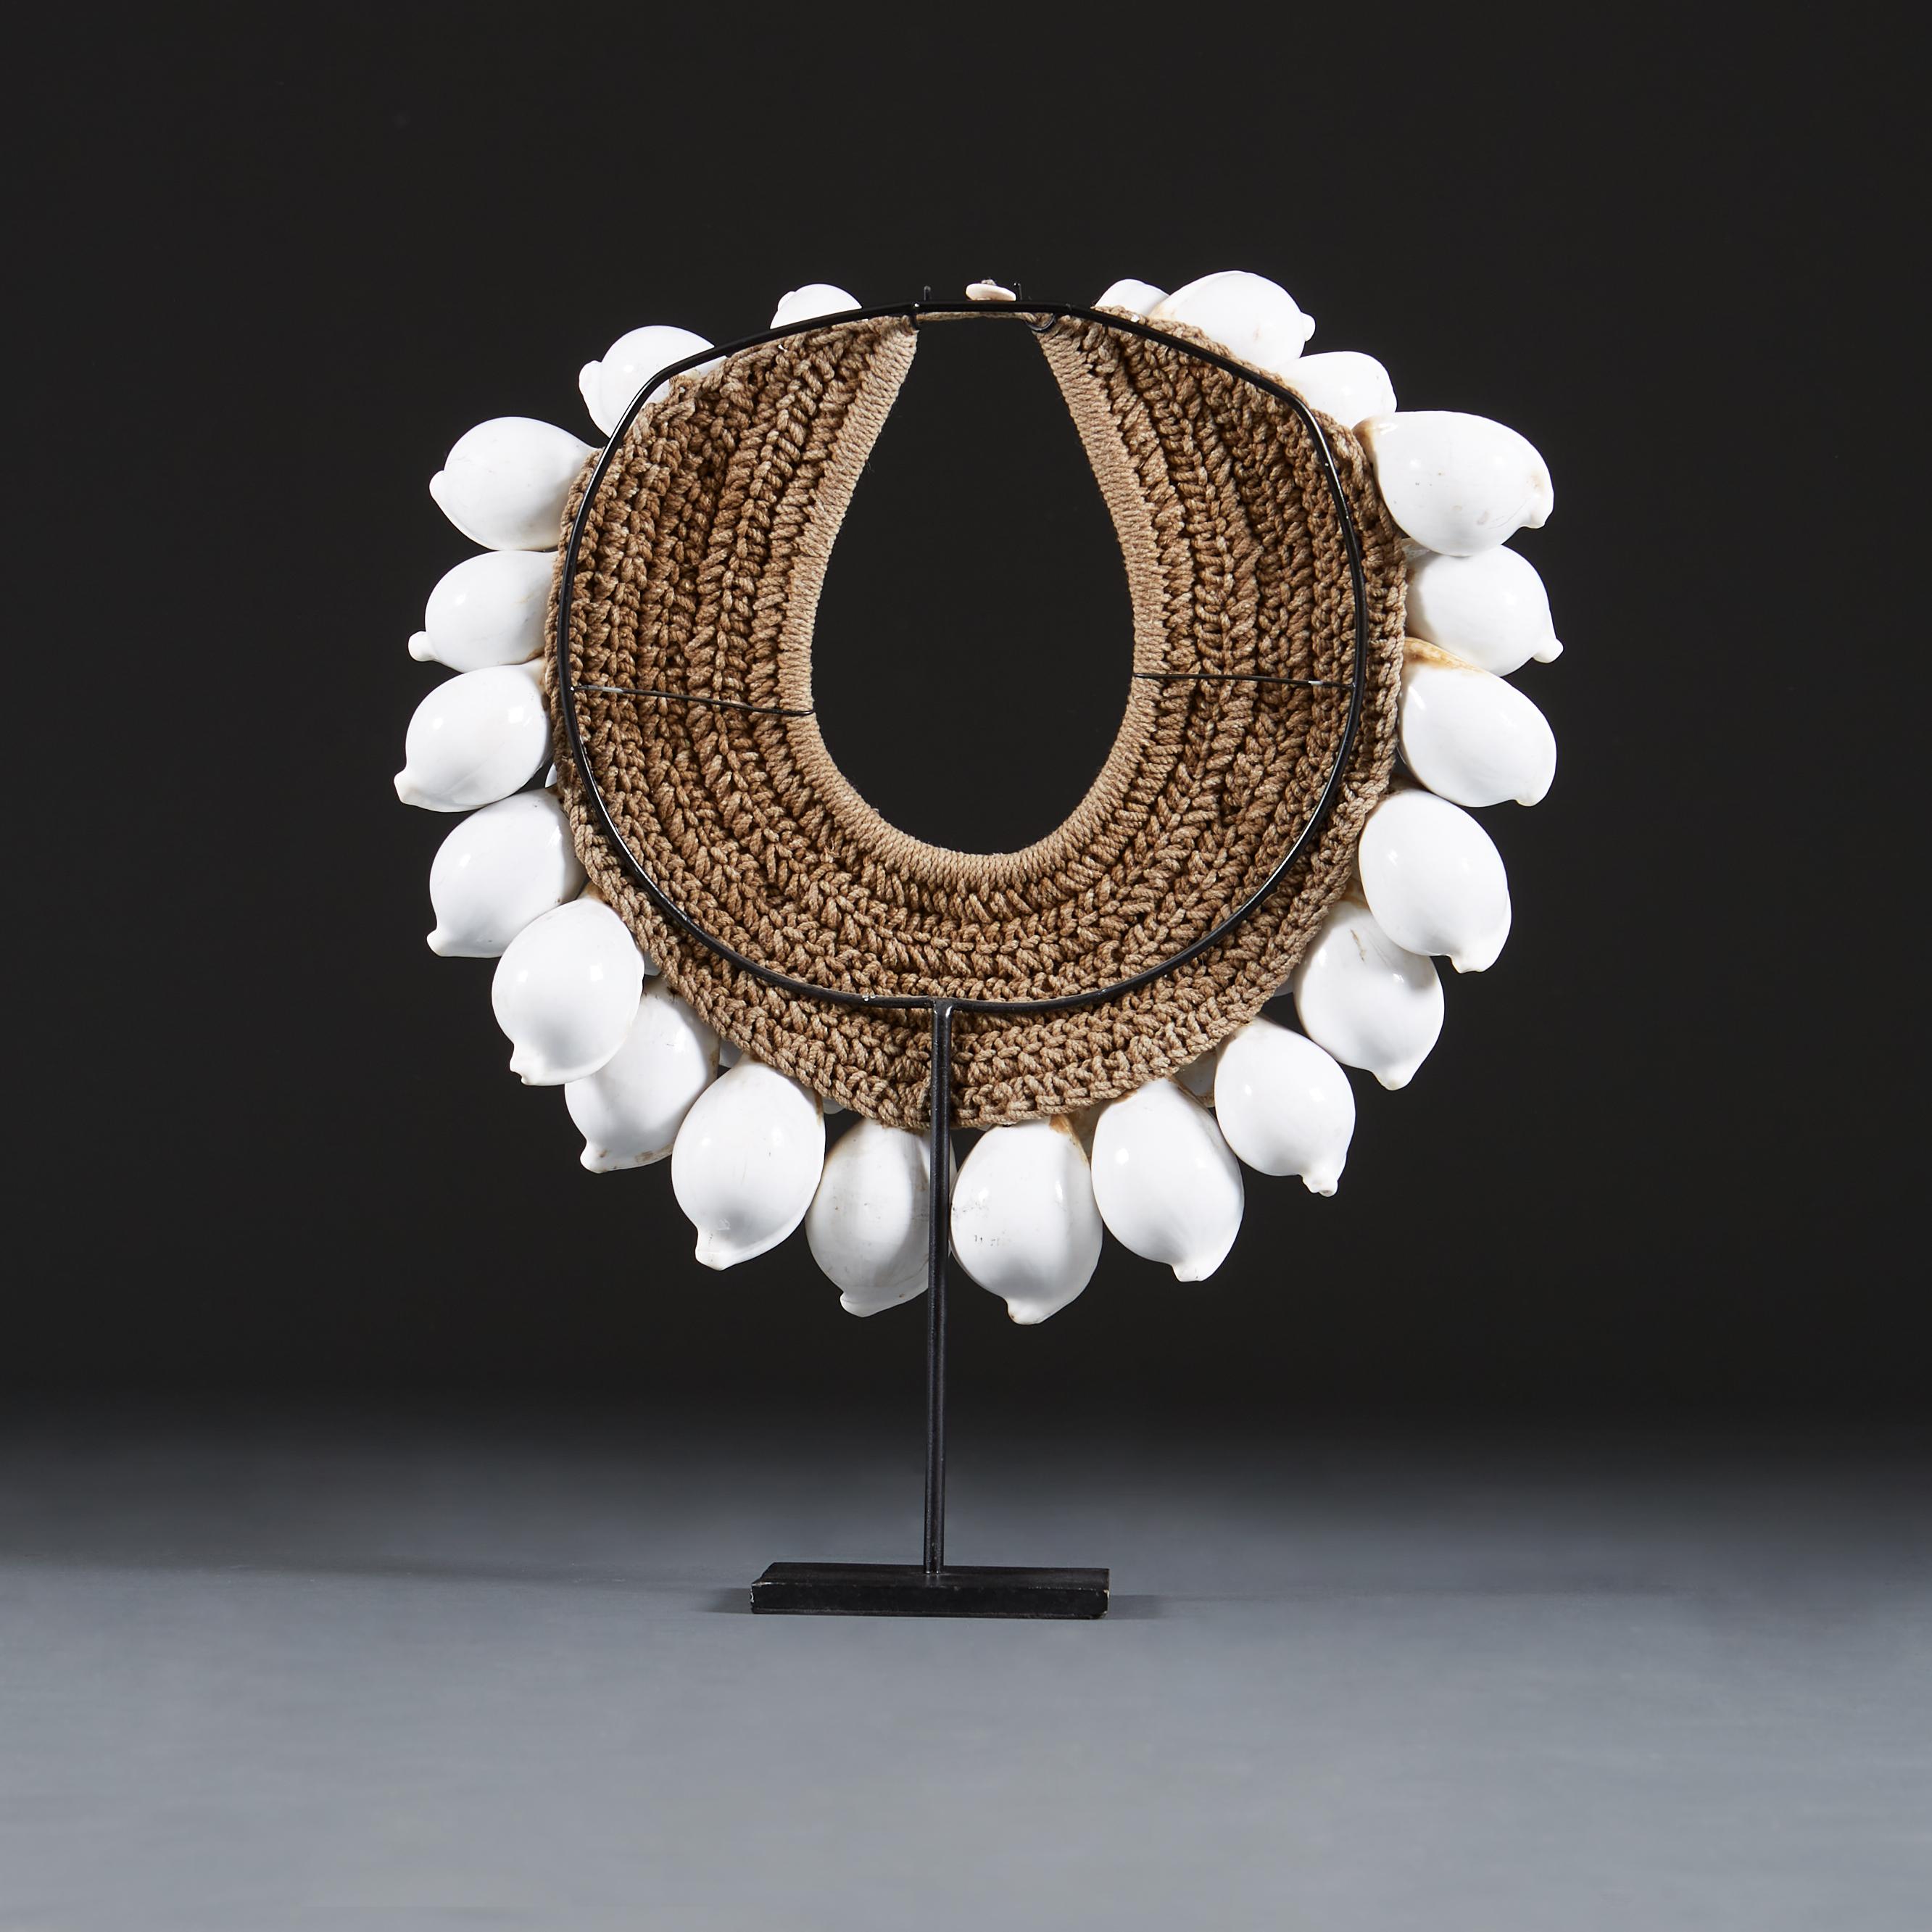 A rare early 20th century cowrie shell necklace made with unusually large and brilliant white cowrie shells, all the shells equally sized throughout, backed on a woven abaca ground, with bespoke metal display stand. Can also be worn as a necklace.